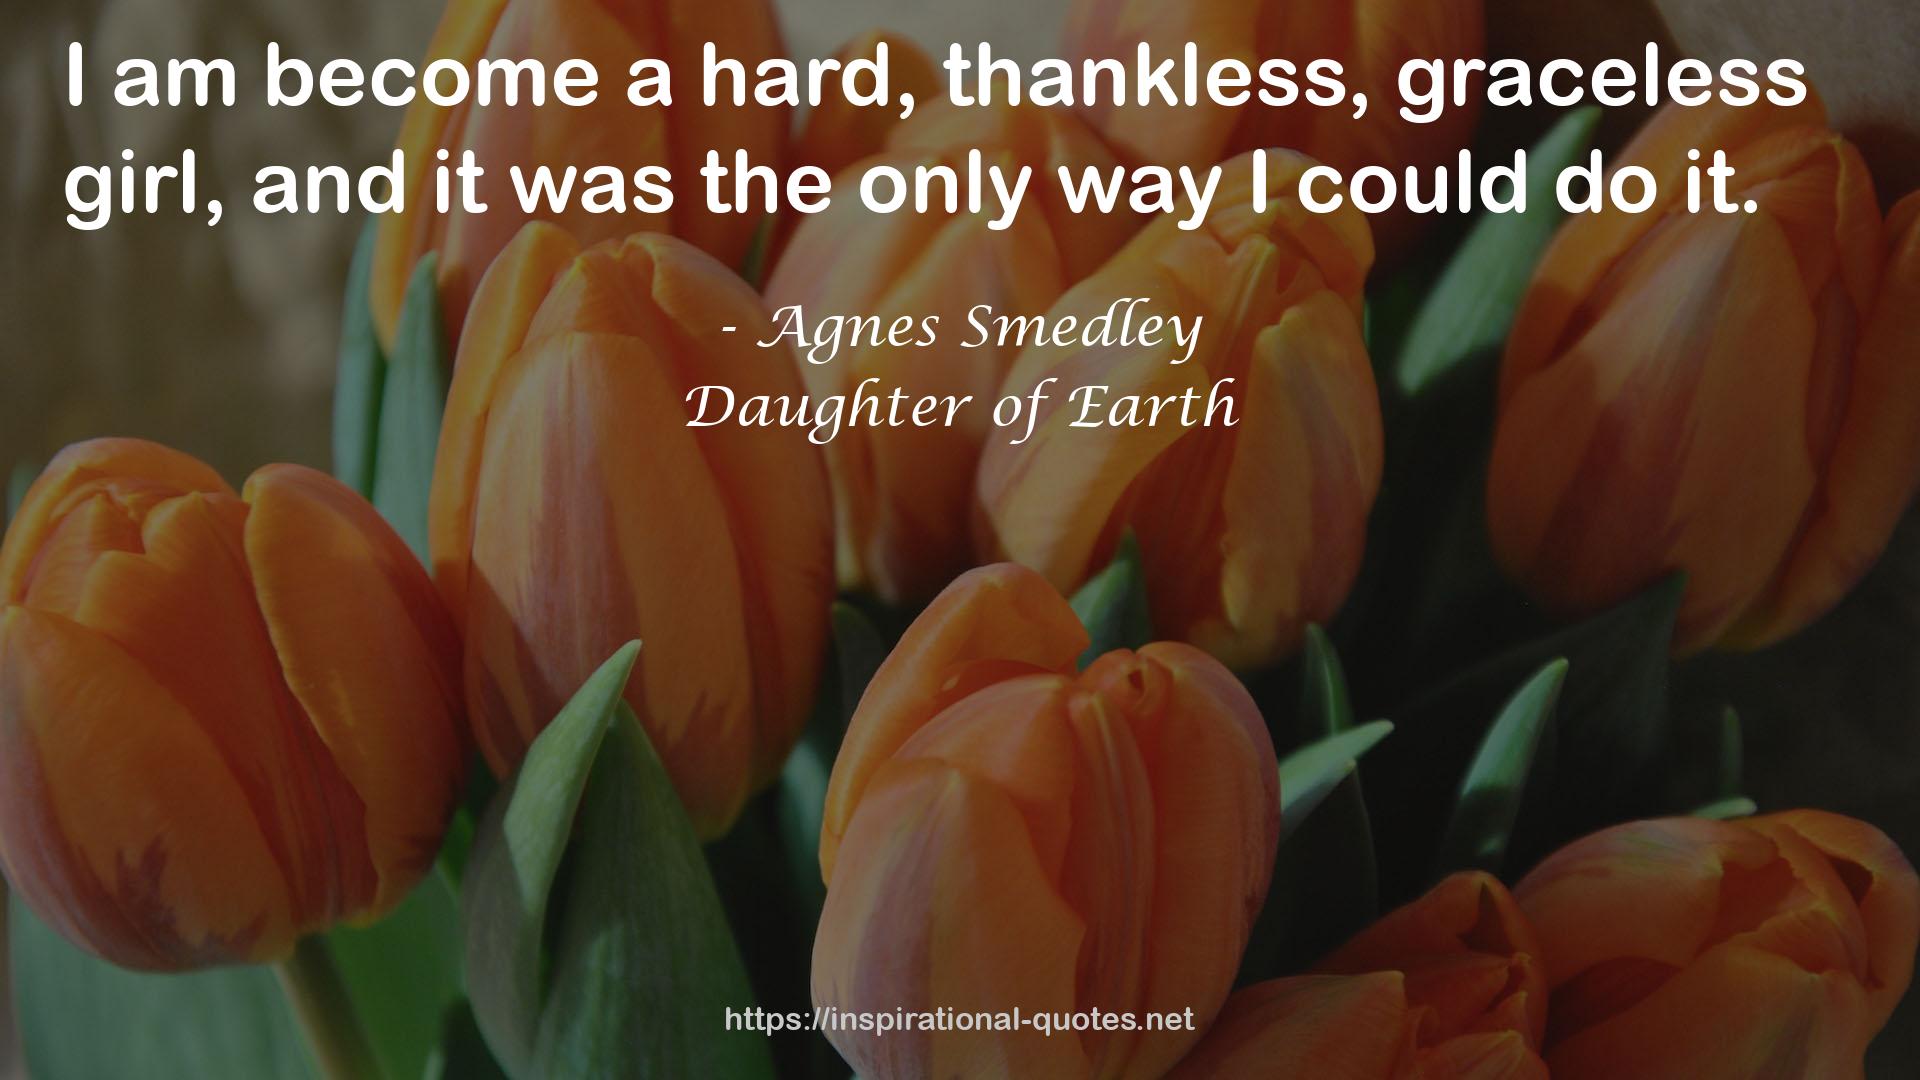 Daughter of Earth QUOTES